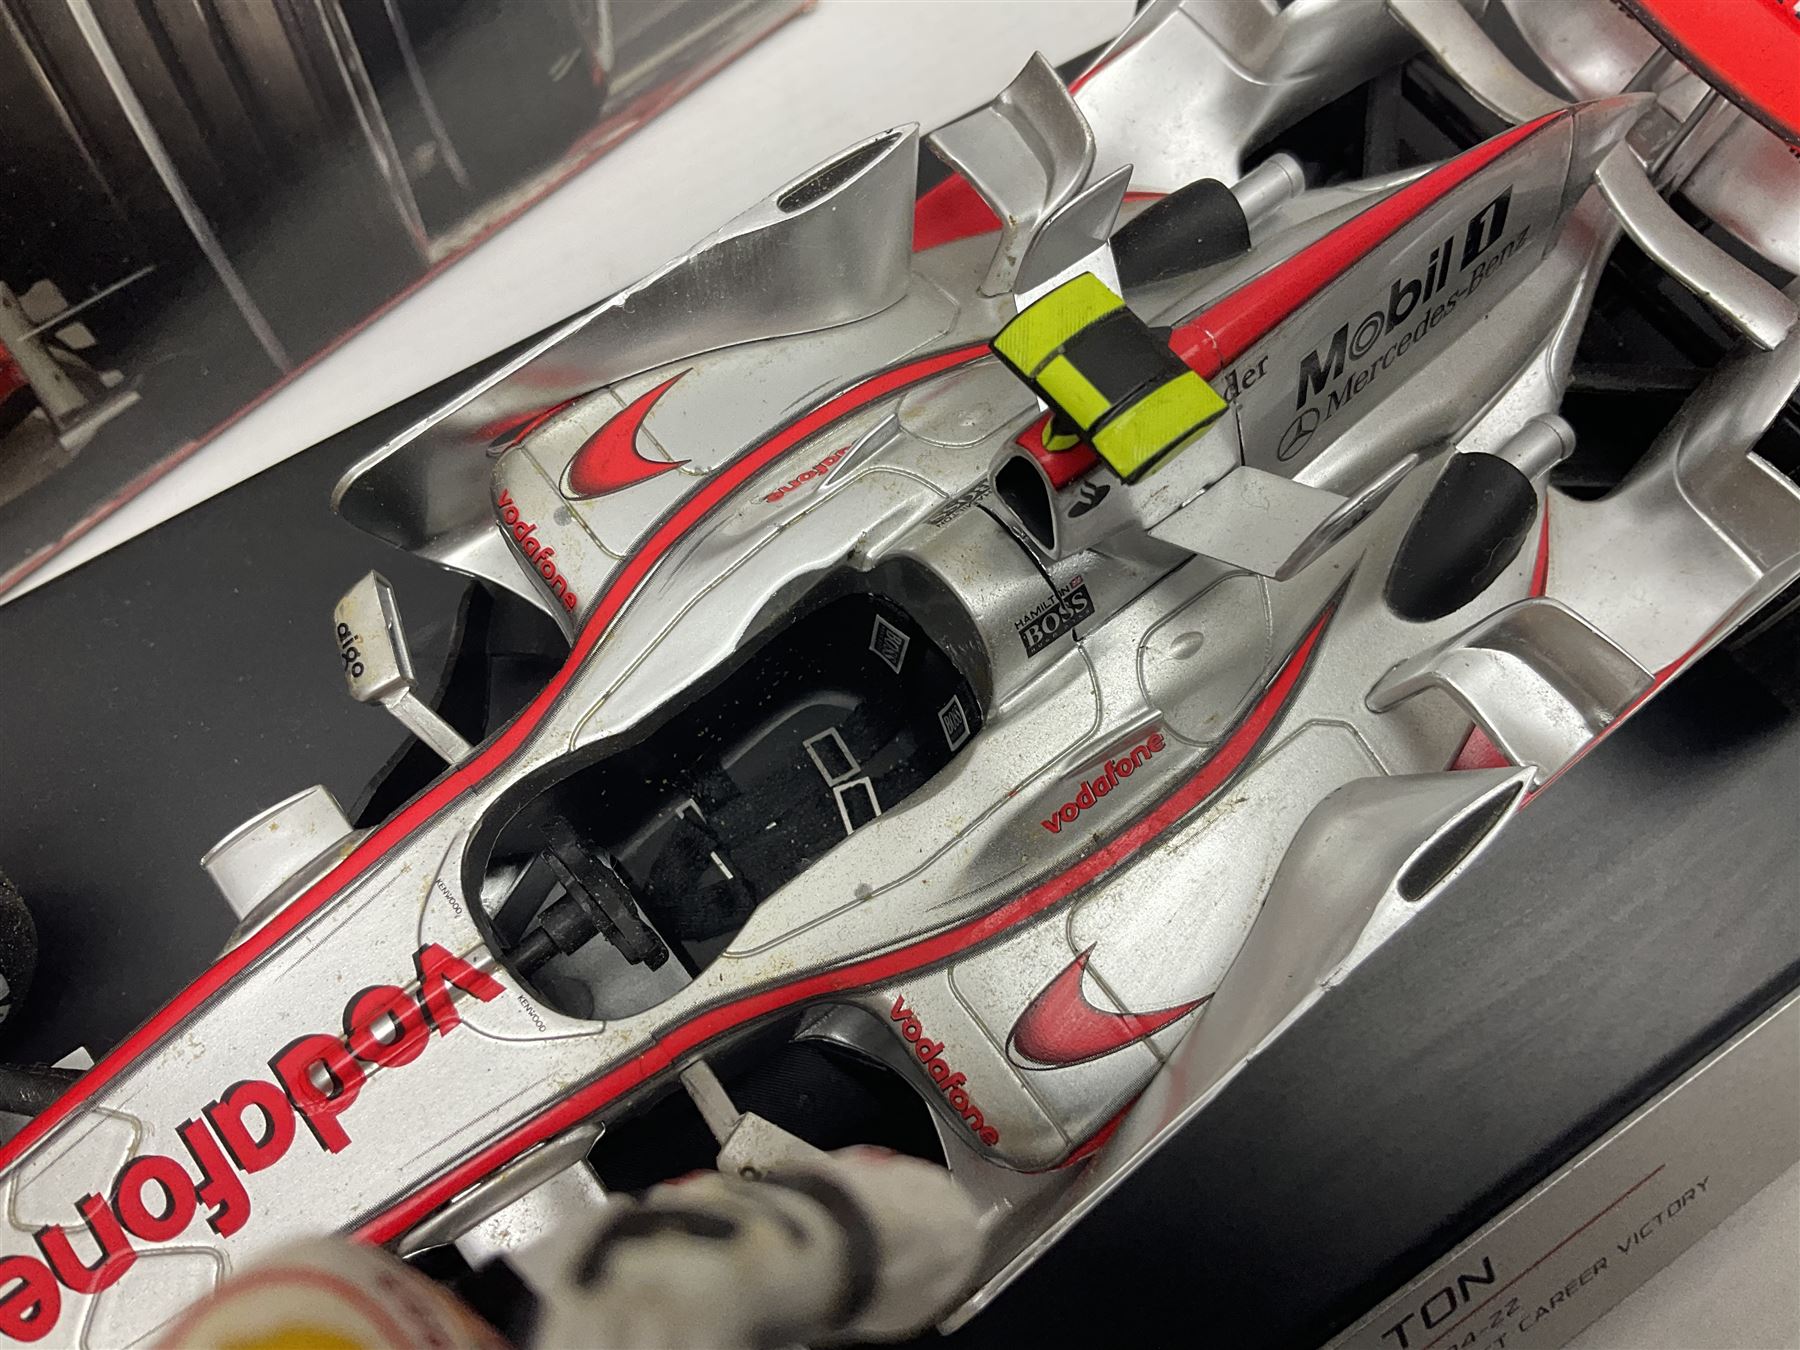 Mattel Hot Wheels 1:18 scale die-cast racing car - Vodaphone McLaren Mercedes; boxed with stand - Image 6 of 10